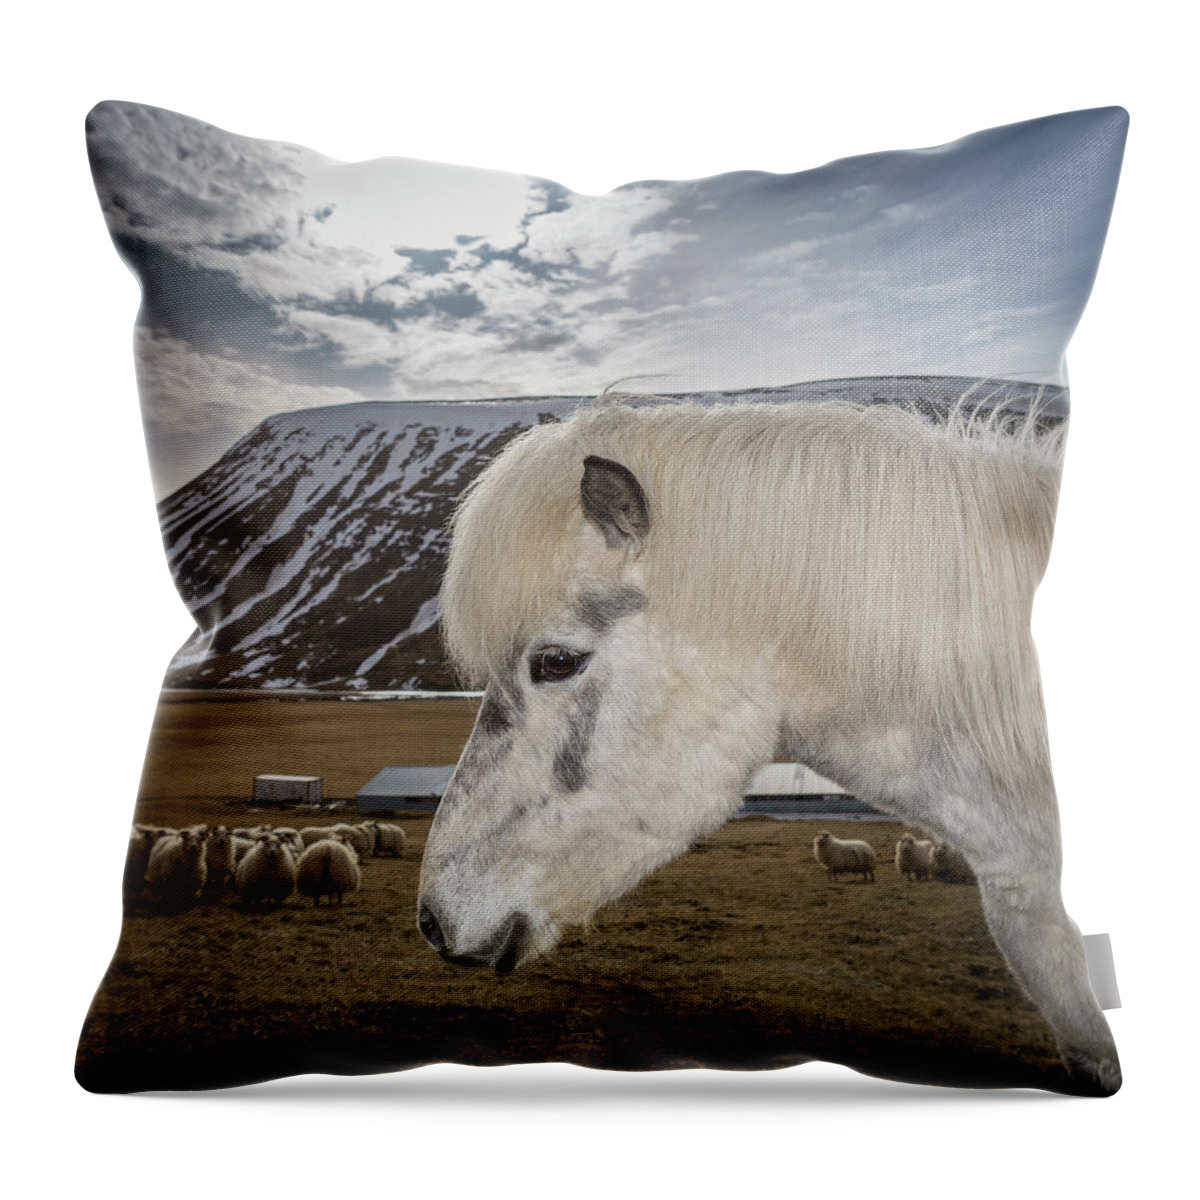 Alertness Throw Pillow featuring the photograph Portrait Of White Horse by Arctic-images